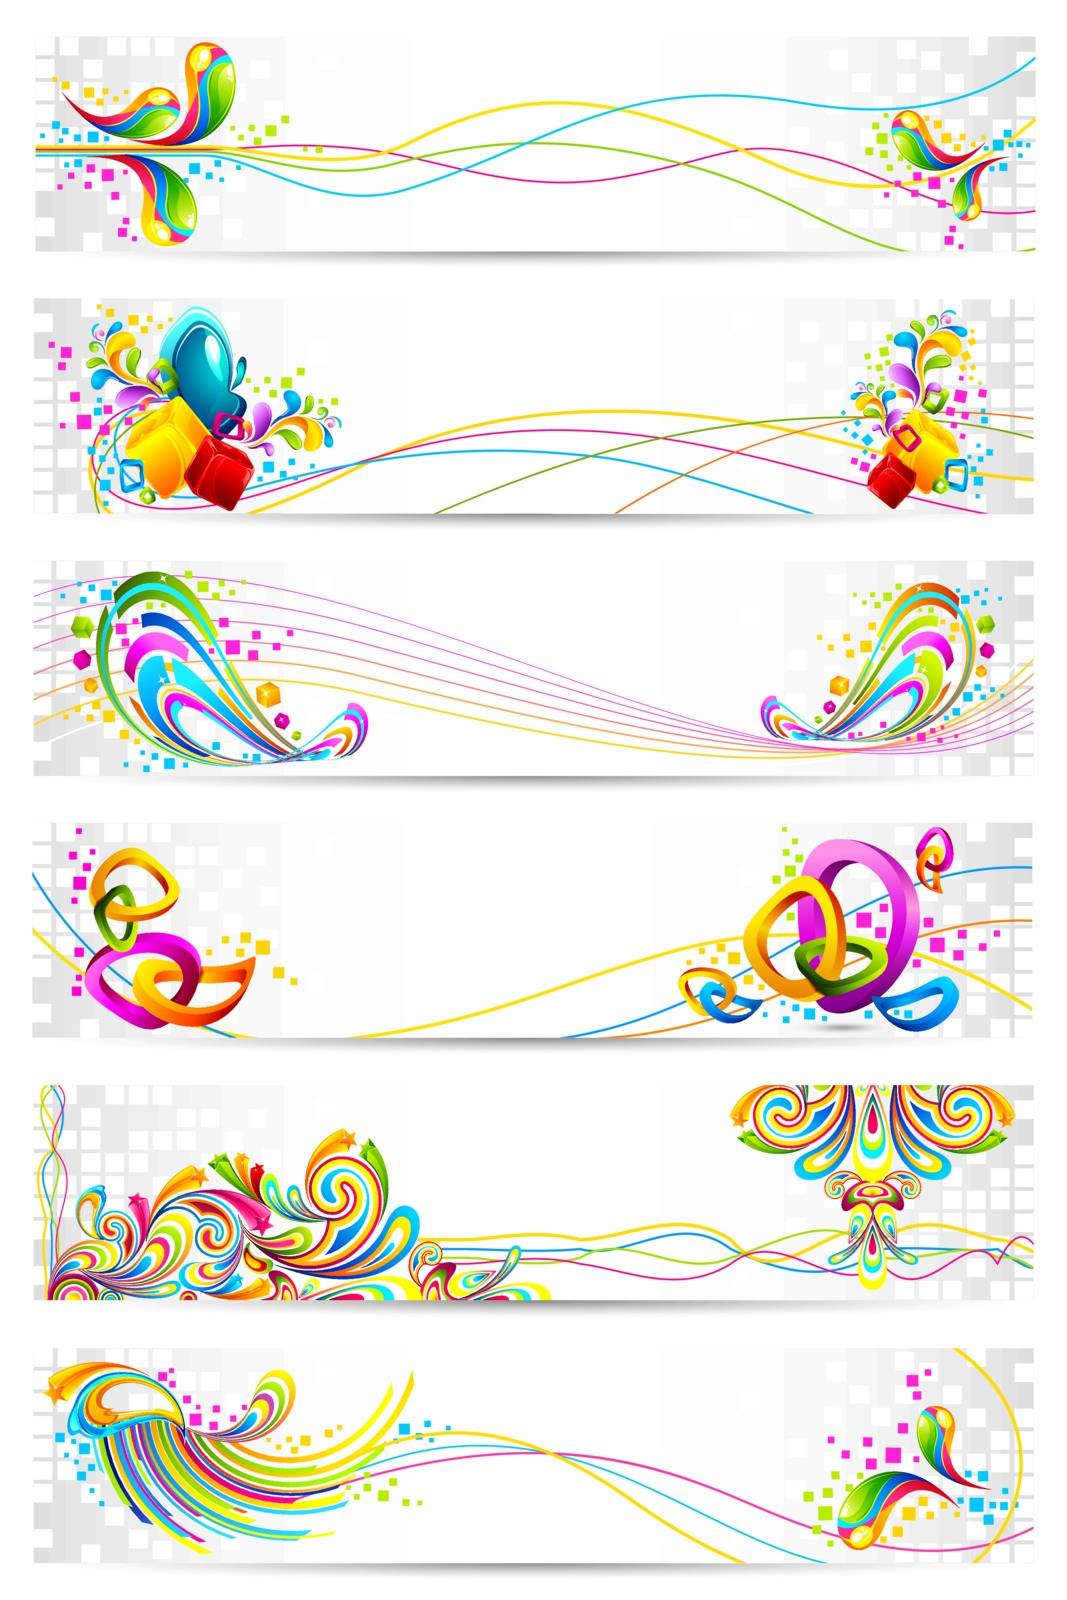 Set of abstract and colorful banners.